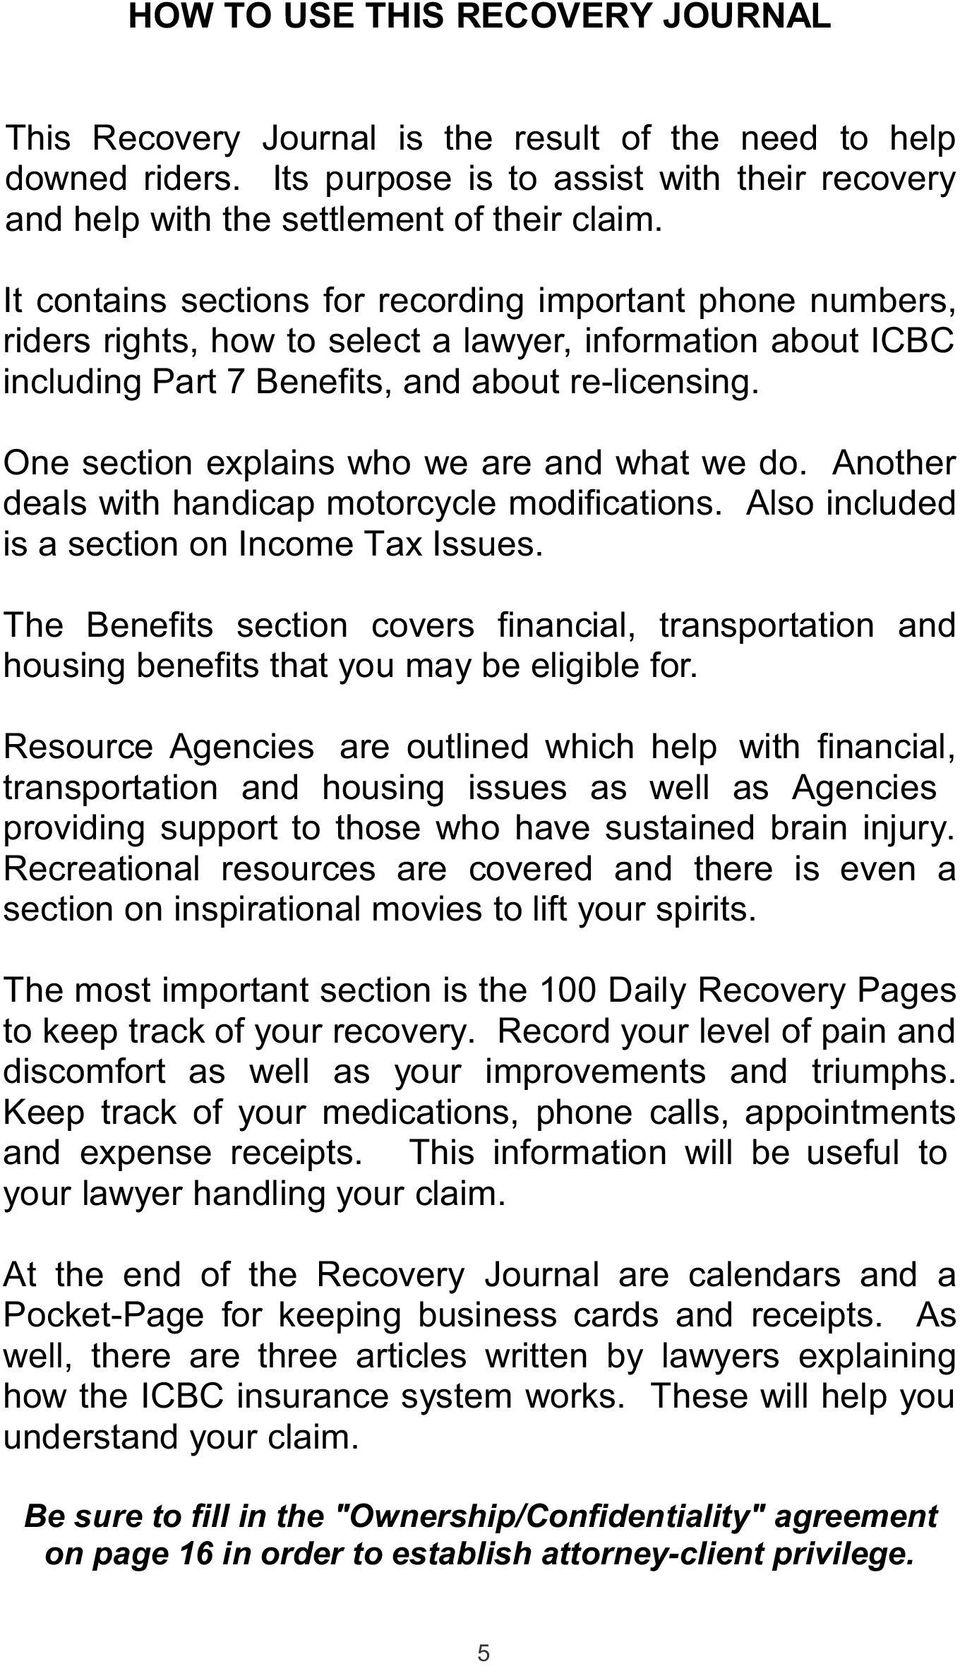 One section explains who we are and what we do. Another deals with handicap motorcycle modifications. Also included is a section on Income Tax Issues.